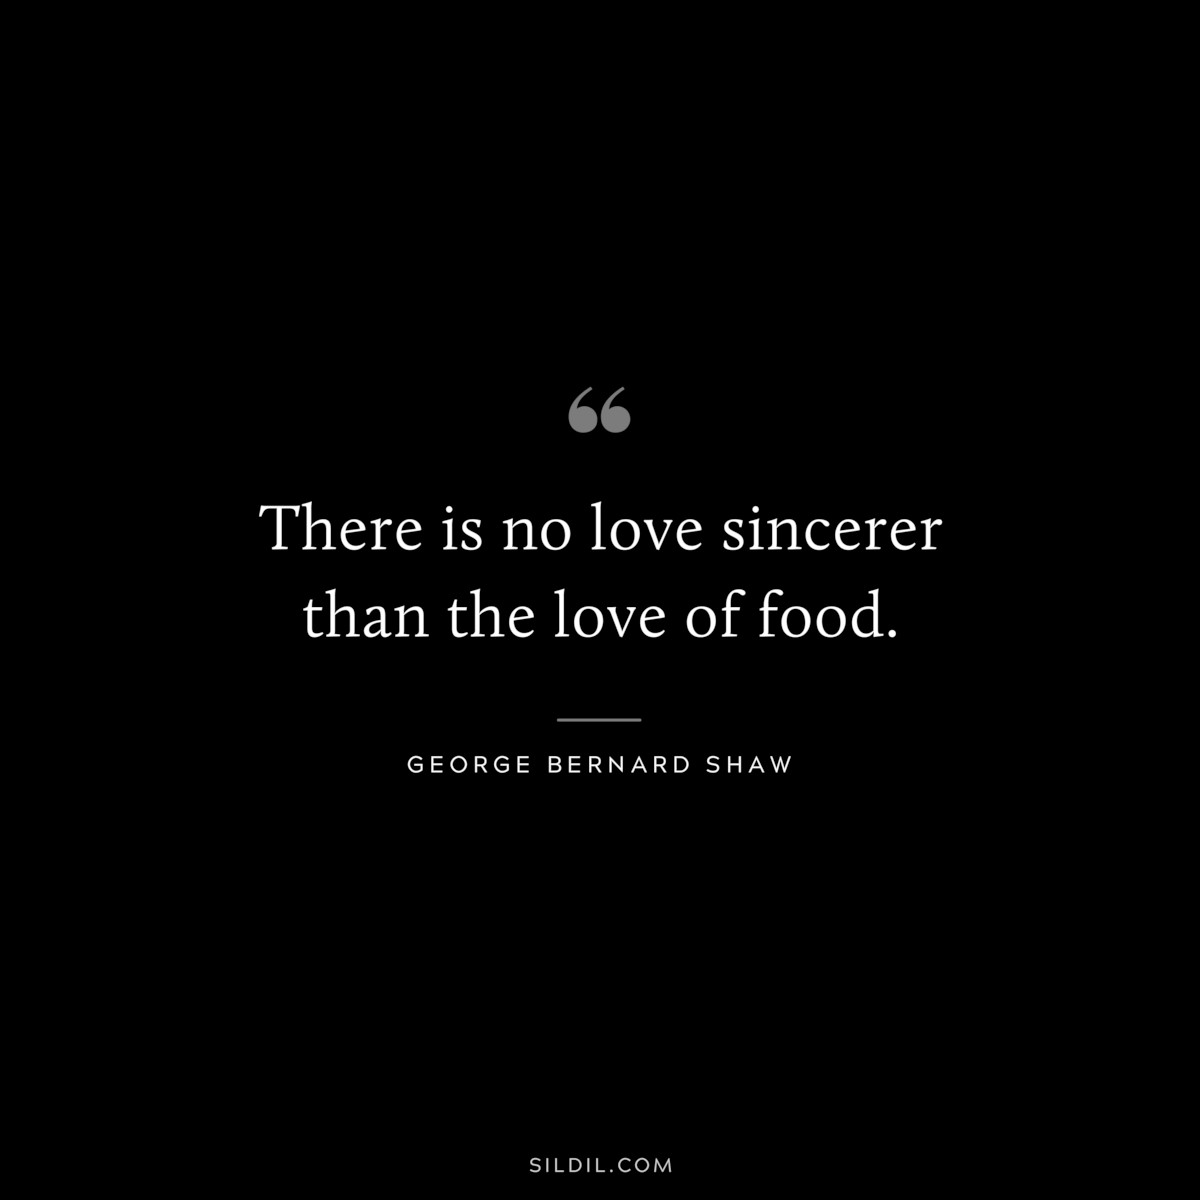 There is no love sincerer than the love of food. ― George Bernard Shaw